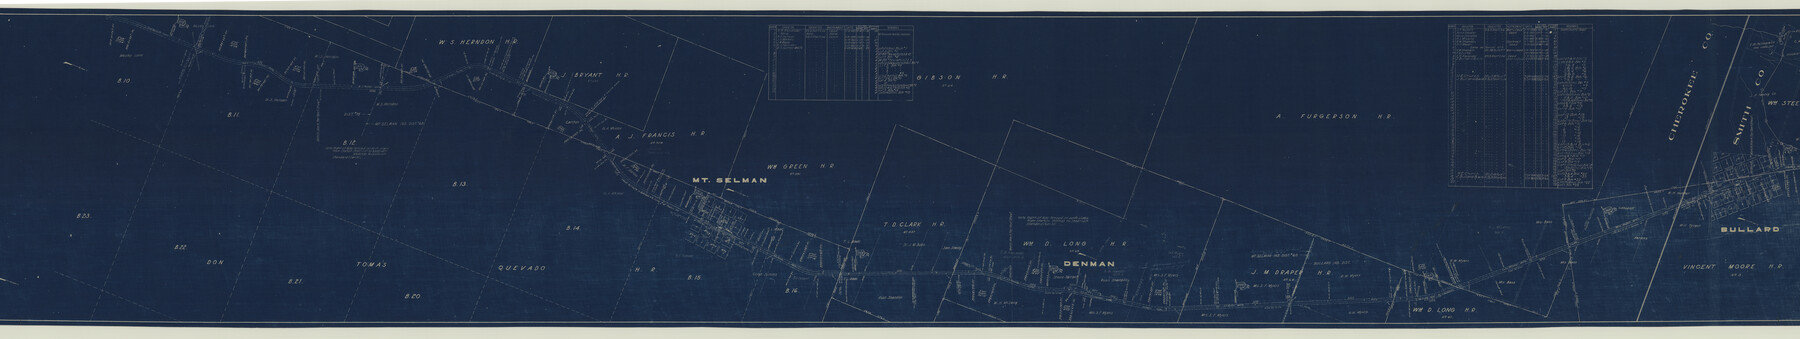 64022, [St. L. S-W. Ry. Of Texas Map of Lufkin Branch in Cherokee County Texas], General Map Collection